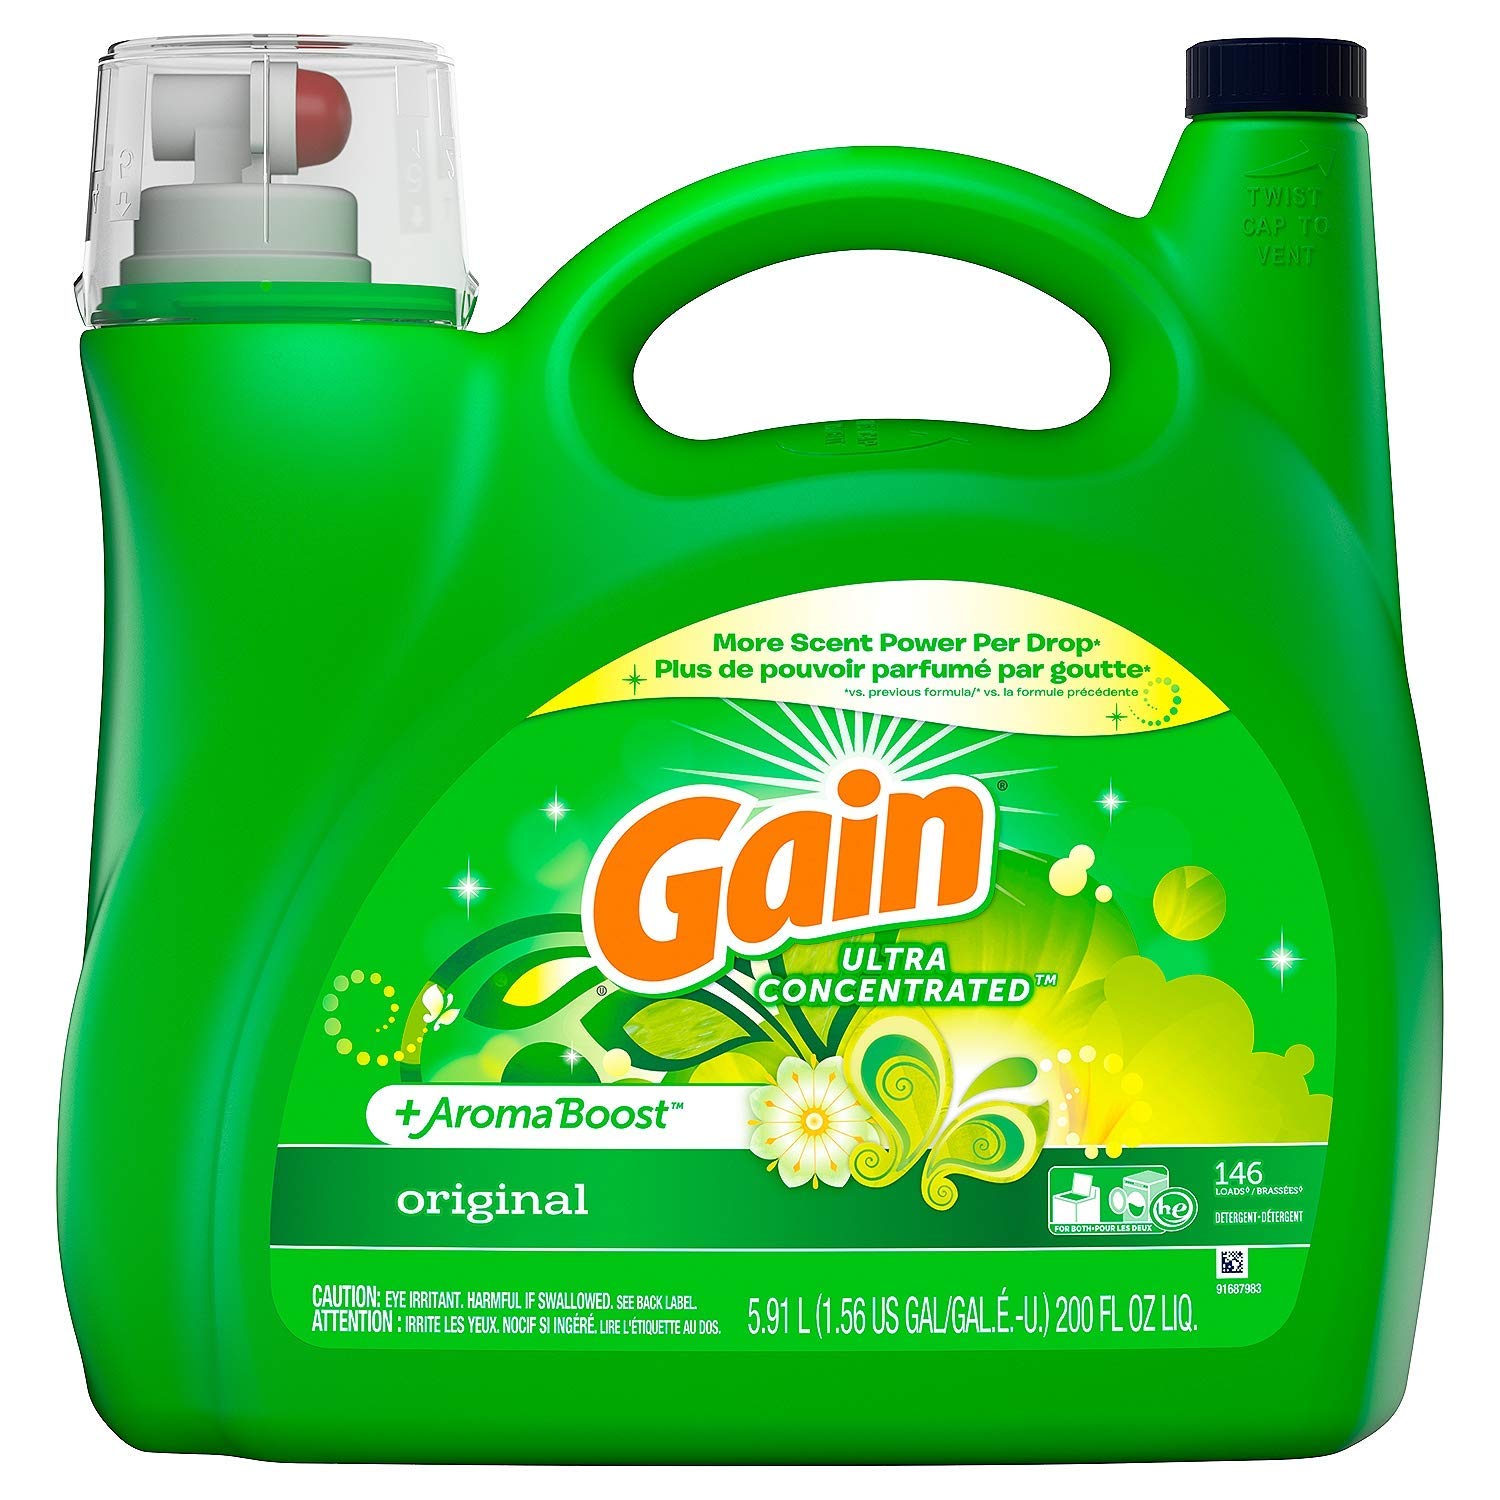 Who Makes Gain Laundry Detergent?